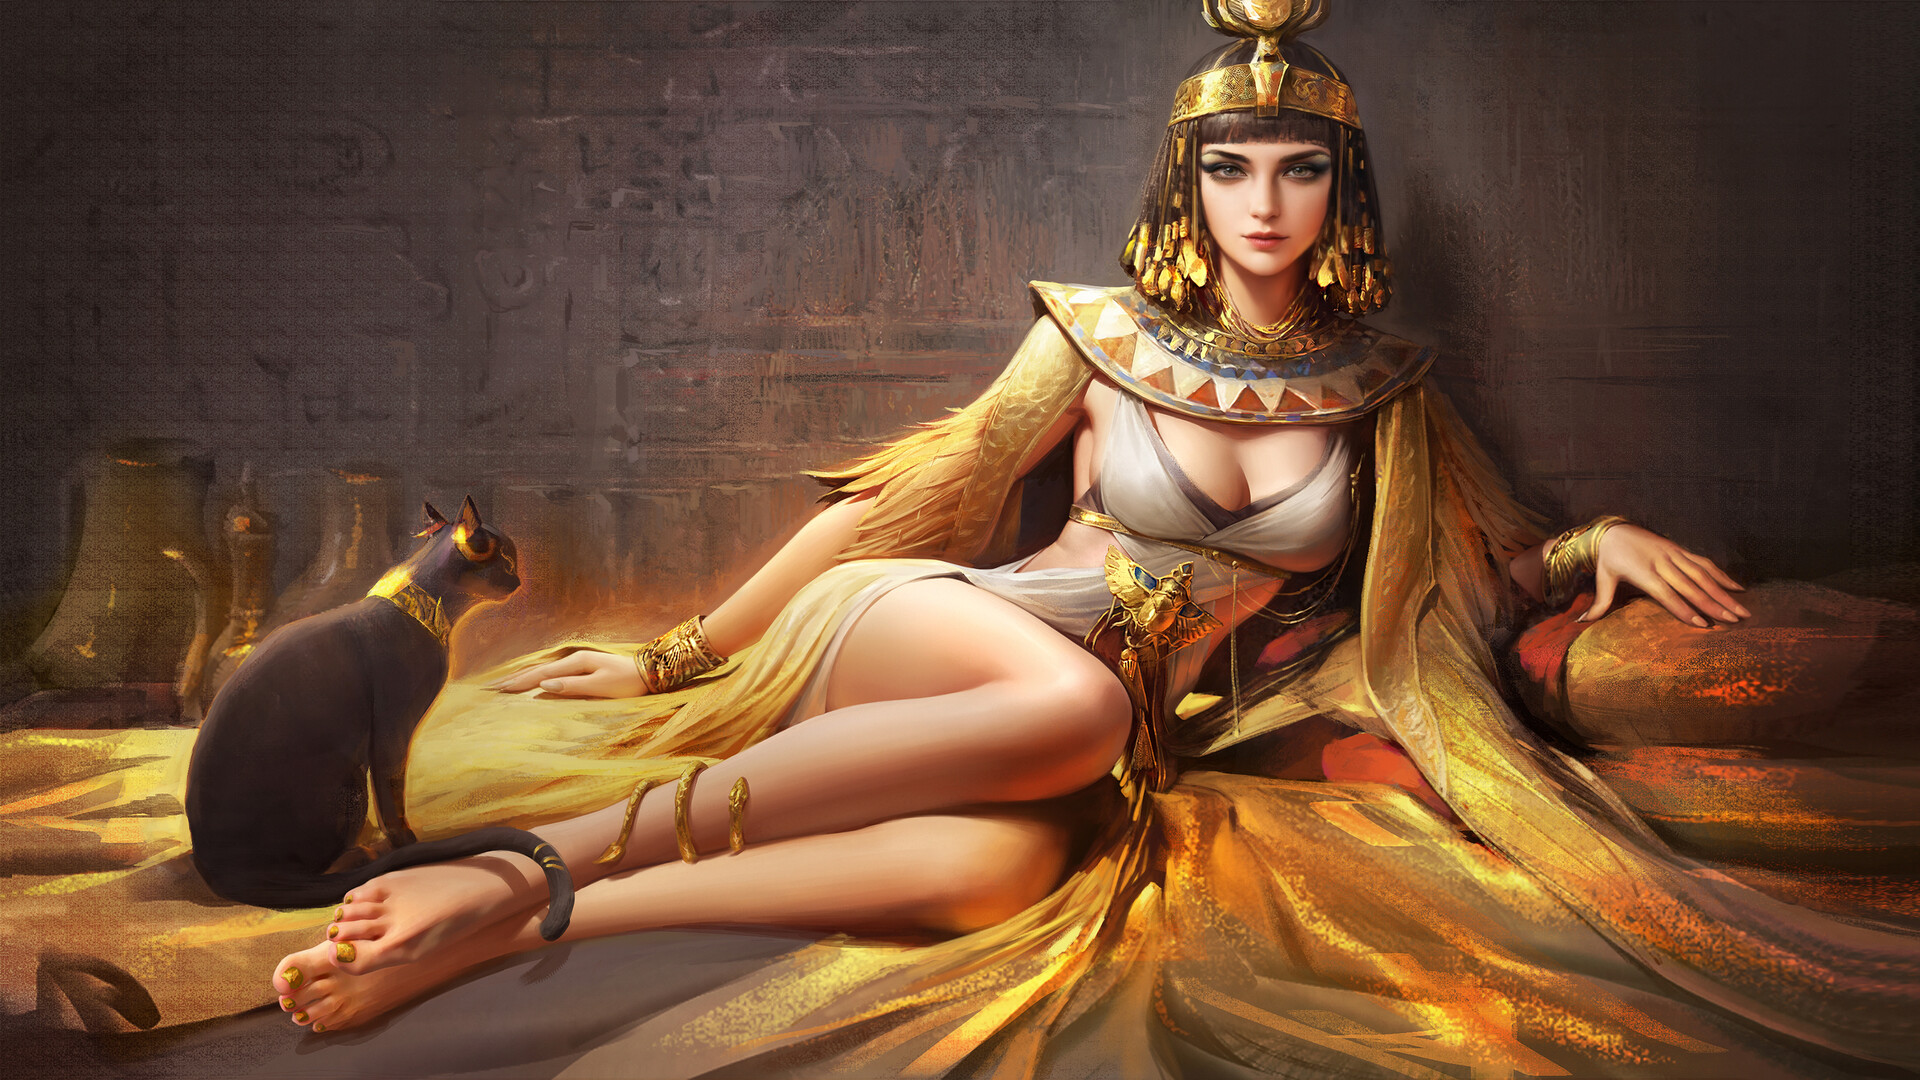 General 1920x1080 MuSi drawing women Egyptian glamour gold cats feathers legs Cleopatra oriental